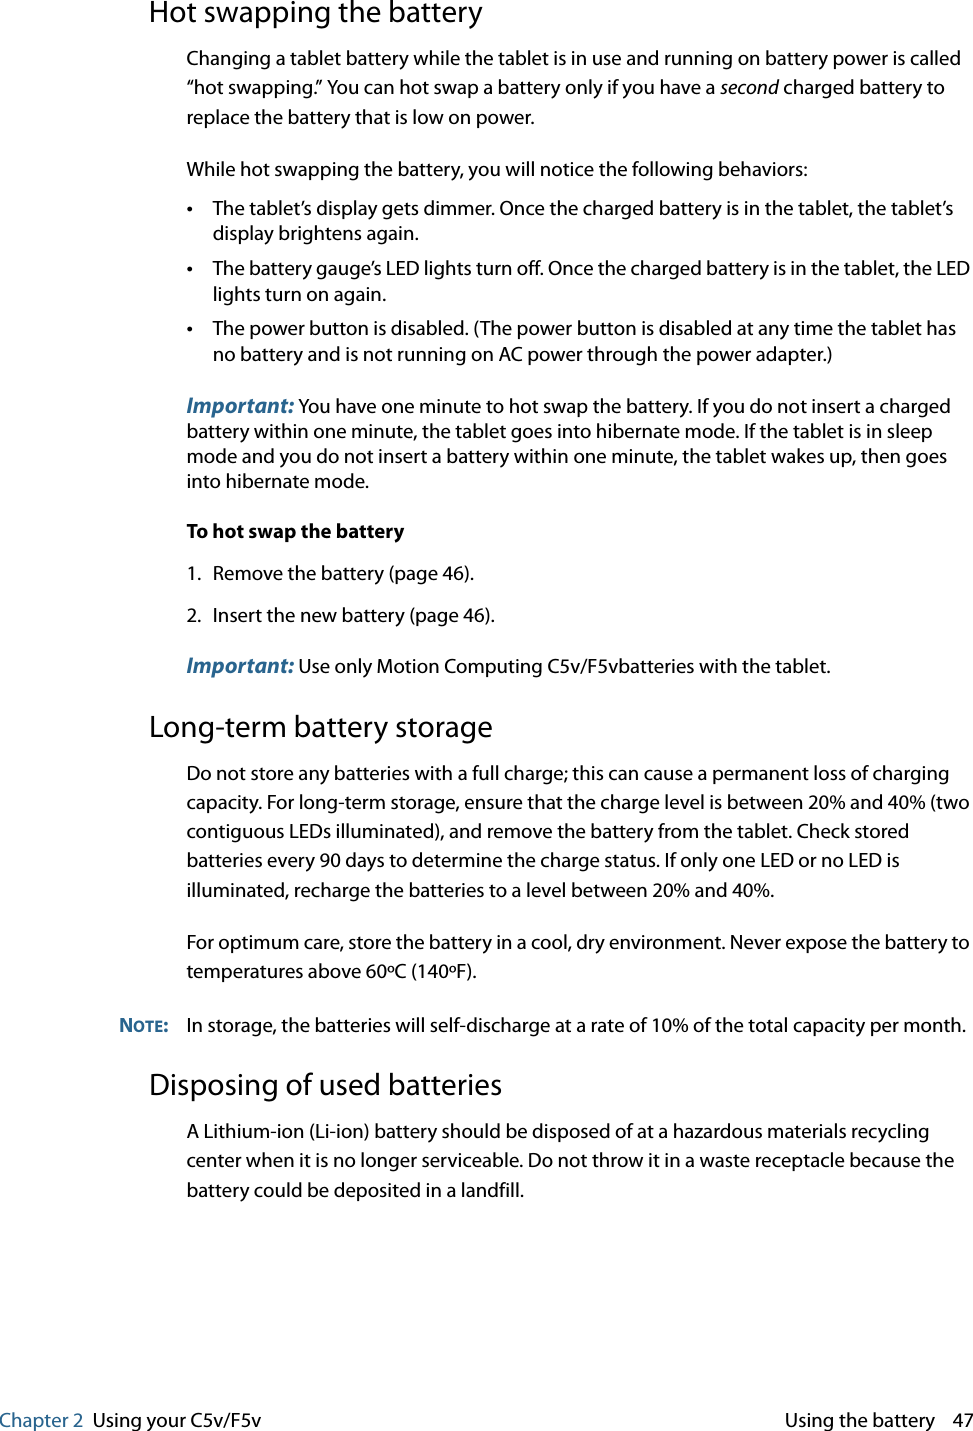 Chapter 2 Using your C5v/F5v  Using the battery    47Hot swapping the batteryChanging a tablet battery while the tablet is in use and running on battery power is called “hot swapping.” You can hot swap a battery only if you have a second charged battery to replace the battery that is low on power.While hot swapping the battery, you will notice the following behaviors:•The tablet’s display gets dimmer. Once the charged battery is in the tablet, the tablet’s display brightens again.•The battery gauge’s LED lights turn off. Once the charged battery is in the tablet, the LED lights turn on again.•The power button is disabled. (The power button is disabled at any time the tablet has no battery and is not running on AC power through the power adapter.)Important: You have one minute to hot swap the battery. If you do not insert a charged battery within one minute, the tablet goes into hibernate mode. If the tablet is in sleep mode and you do not insert a battery within one minute, the tablet wakes up, then goes into hibernate mode.To hot swap the battery1. Remove the battery (page 46).2. Insert the new battery (page 46).Important: Use only Motion Computing C5v/F5vbatteries with the tablet.Long-term battery storageDo not store any batteries with a full charge; this can cause a permanent loss of charging capacity. For long-term storage, ensure that the charge level is between 20% and 40% (two contiguous LEDs illuminated), and remove the battery from the tablet. Check stored batteries every 90 days to determine the charge status. If only one LED or no LED is illuminated, recharge the batteries to a level between 20% and 40%.For optimum care, store the battery in a cool, dry environment. Never expose the battery to temperatures above 60ºC (140ºF).NOTE:In storage, the batteries will self-discharge at a rate of 10% of the total capacity per month.Disposing of used batteriesA Lithium-ion (Li-ion) battery should be disposed of at a hazardous materials recycling center when it is no longer serviceable. Do not throw it in a waste receptacle because the battery could be deposited in a landfill.